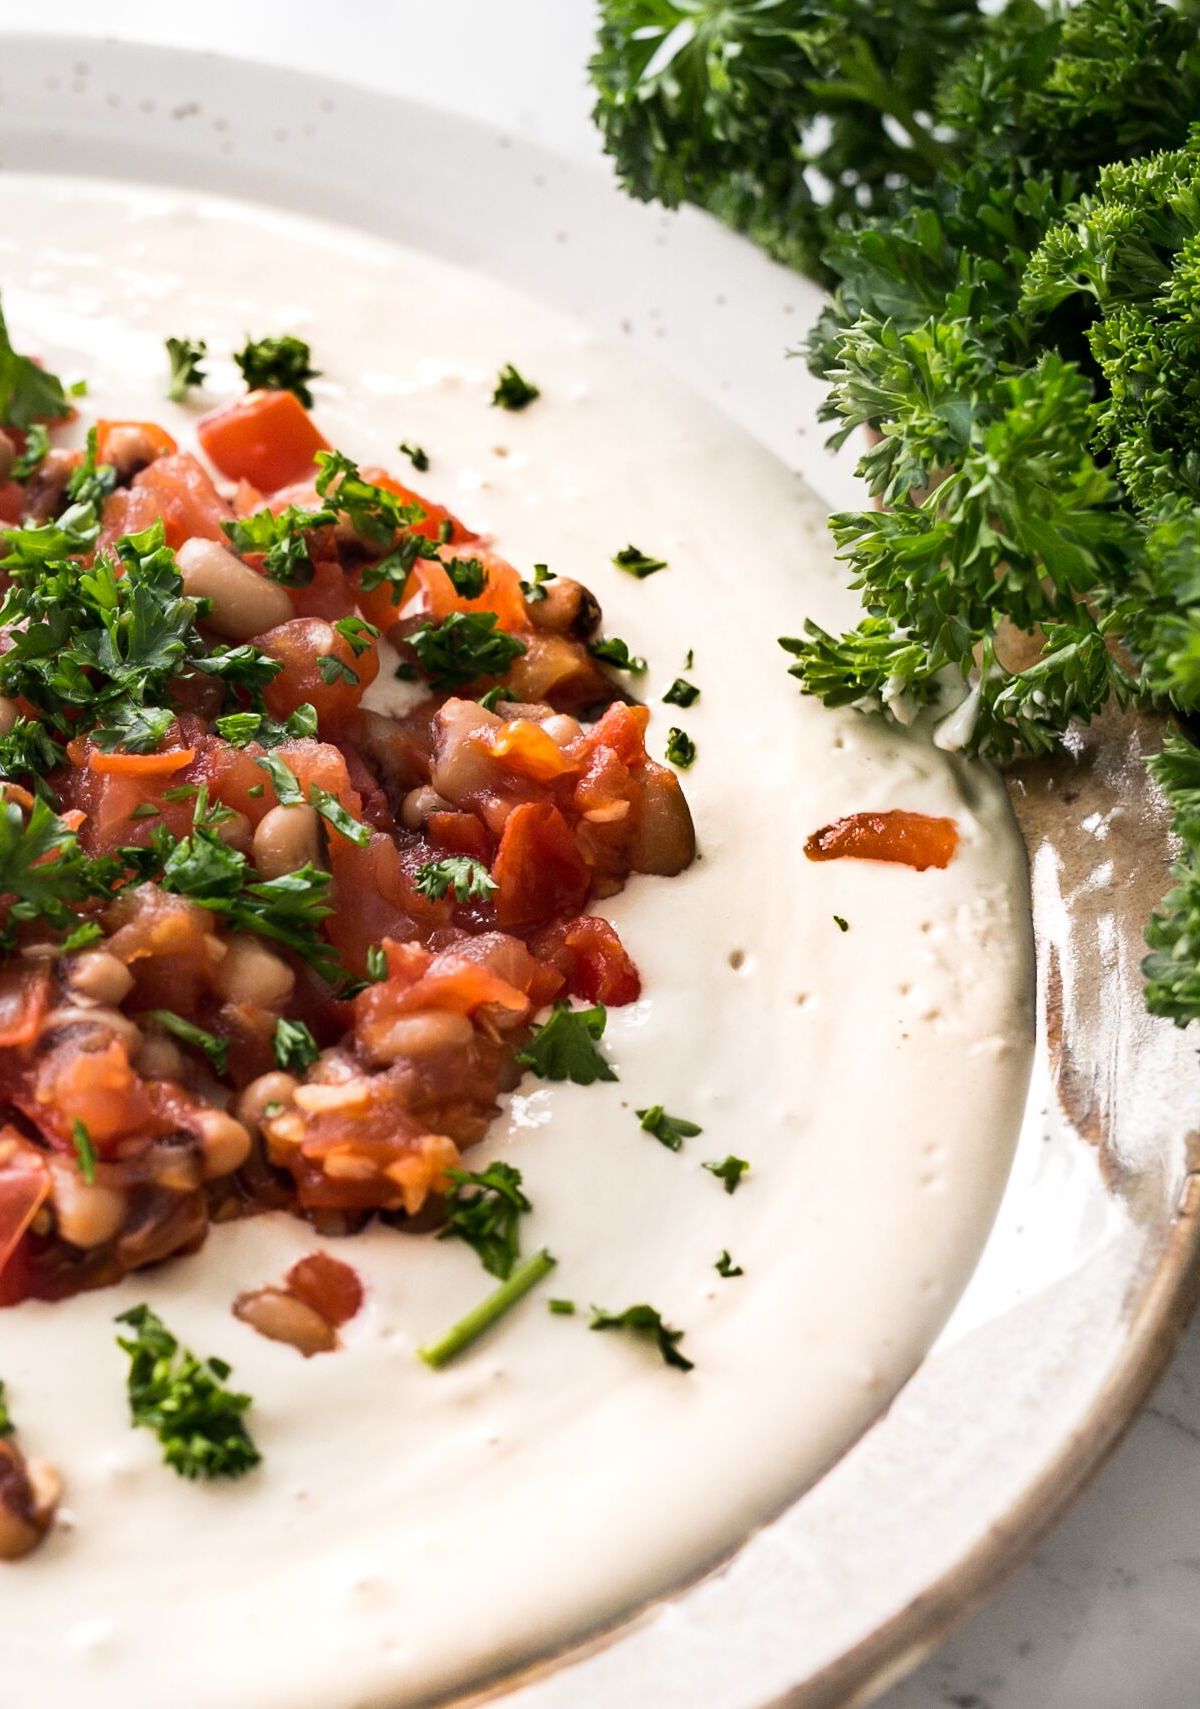 10 Mediterranean Diet Approved Recipes to Add to Your Meal Plan - Black Eyed Peas Masabacha